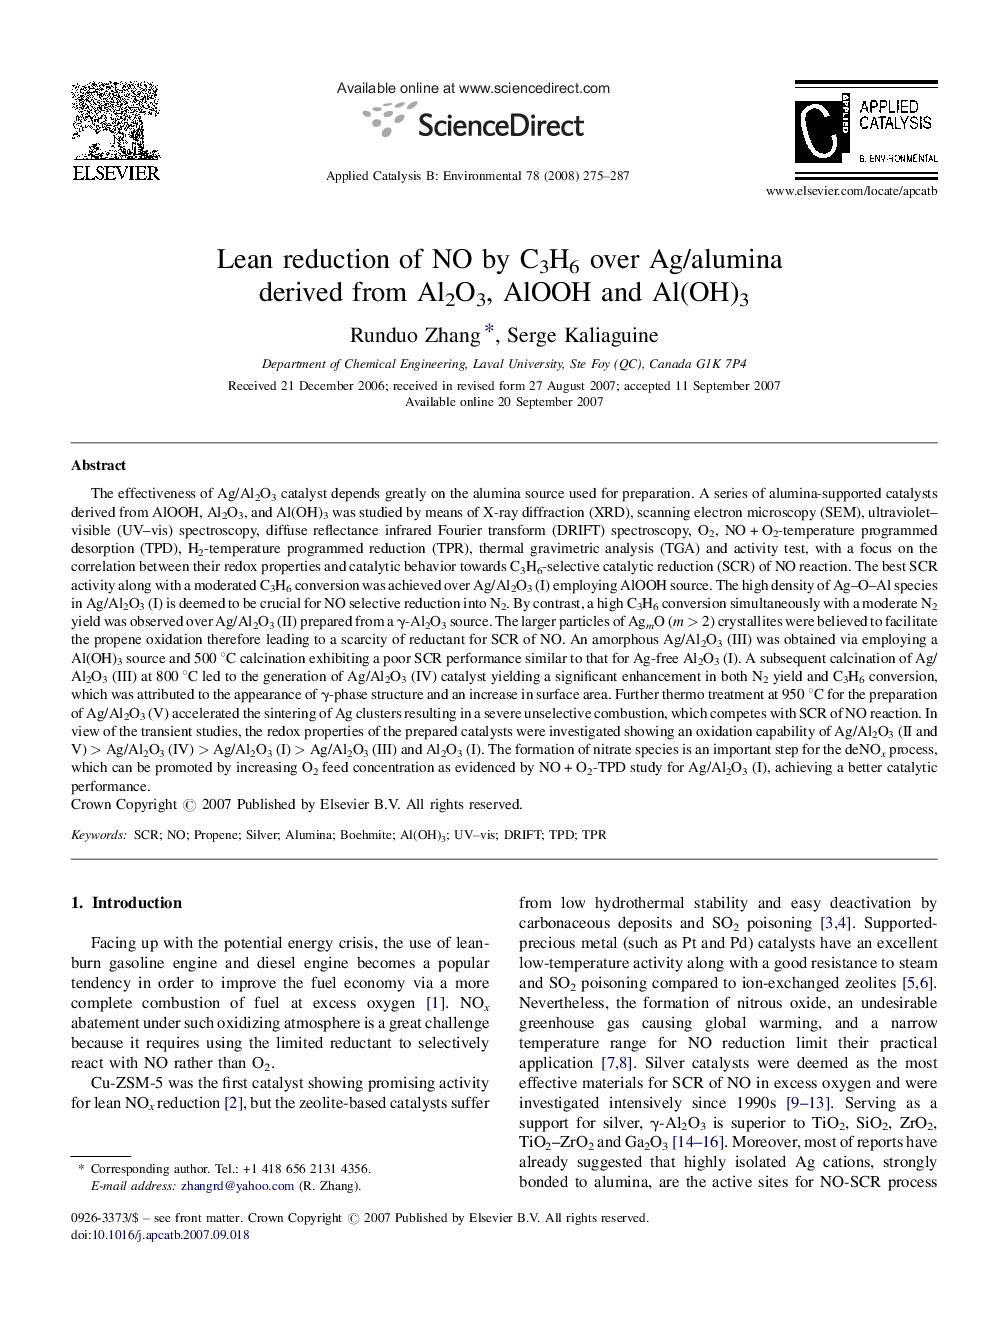 Lean reduction of NO by C3H6 over Ag/alumina derived from Al2O3, AlOOH and Al(OH)3